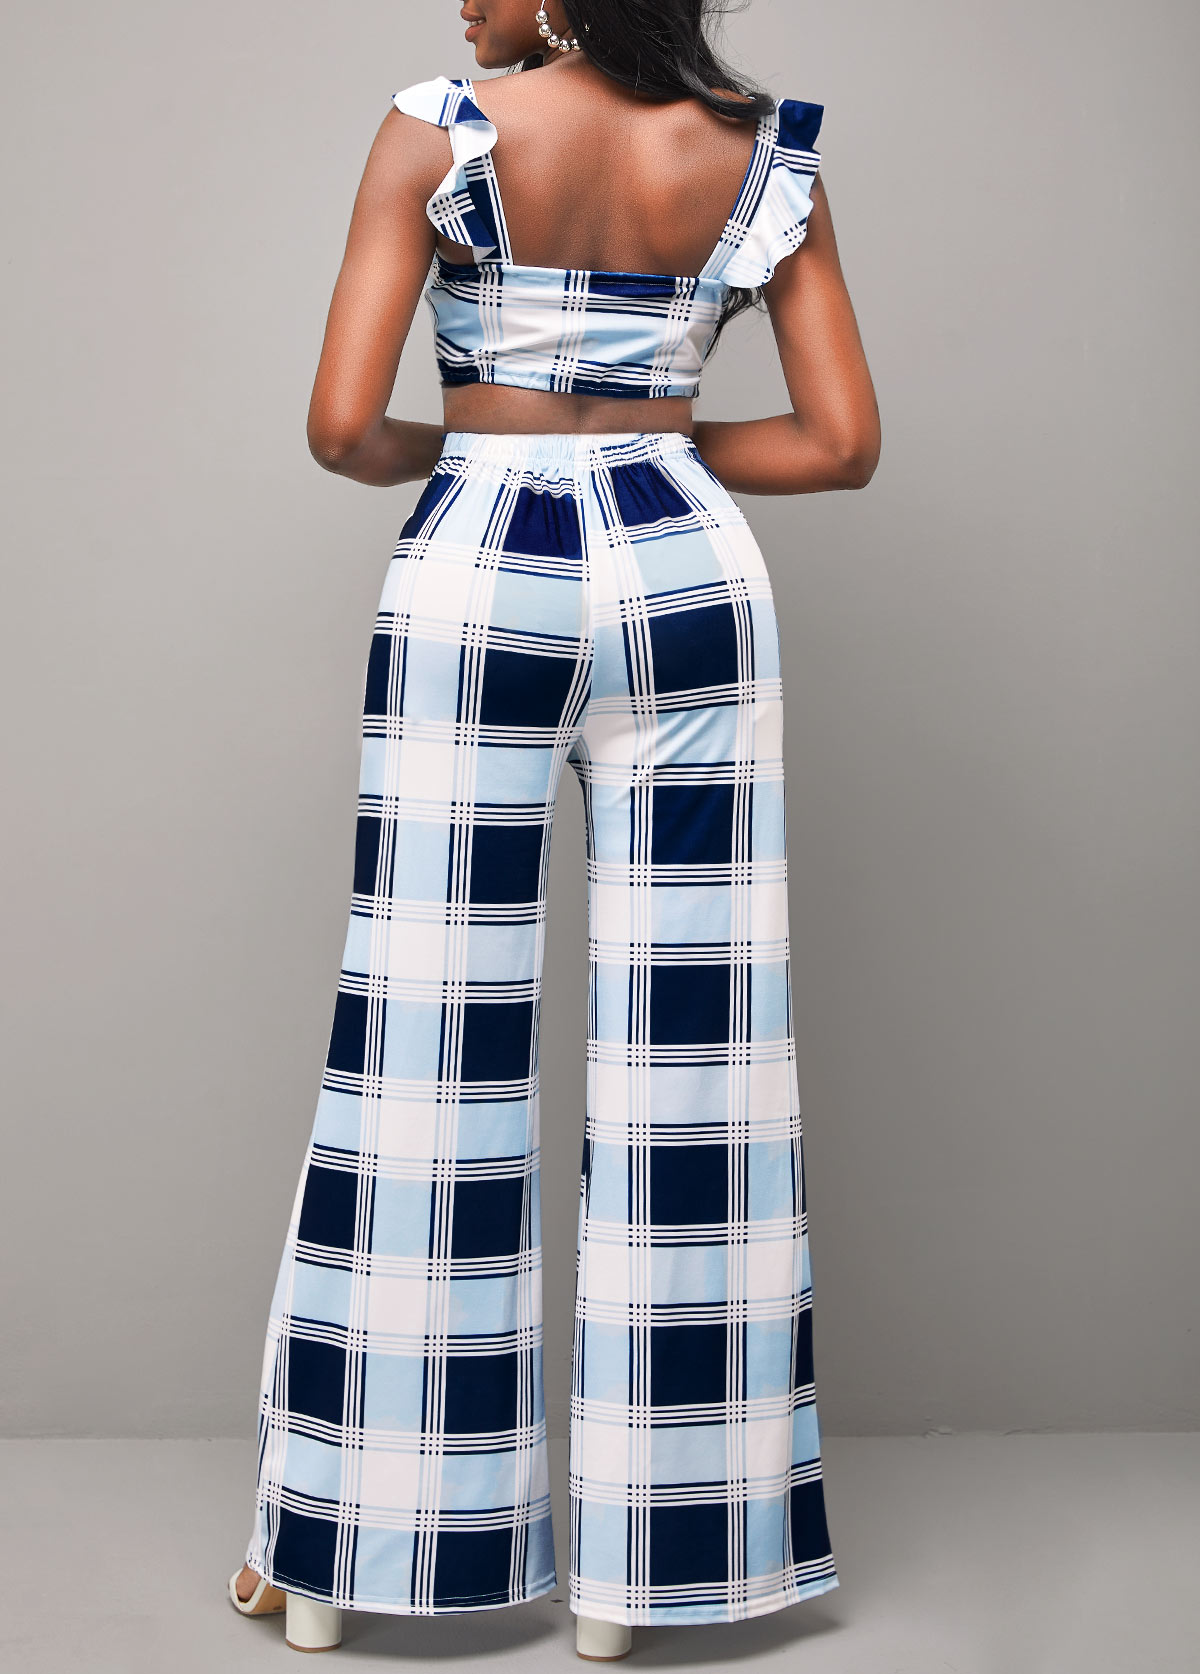 Plaid Decorative Button Top and High Waisted Pants